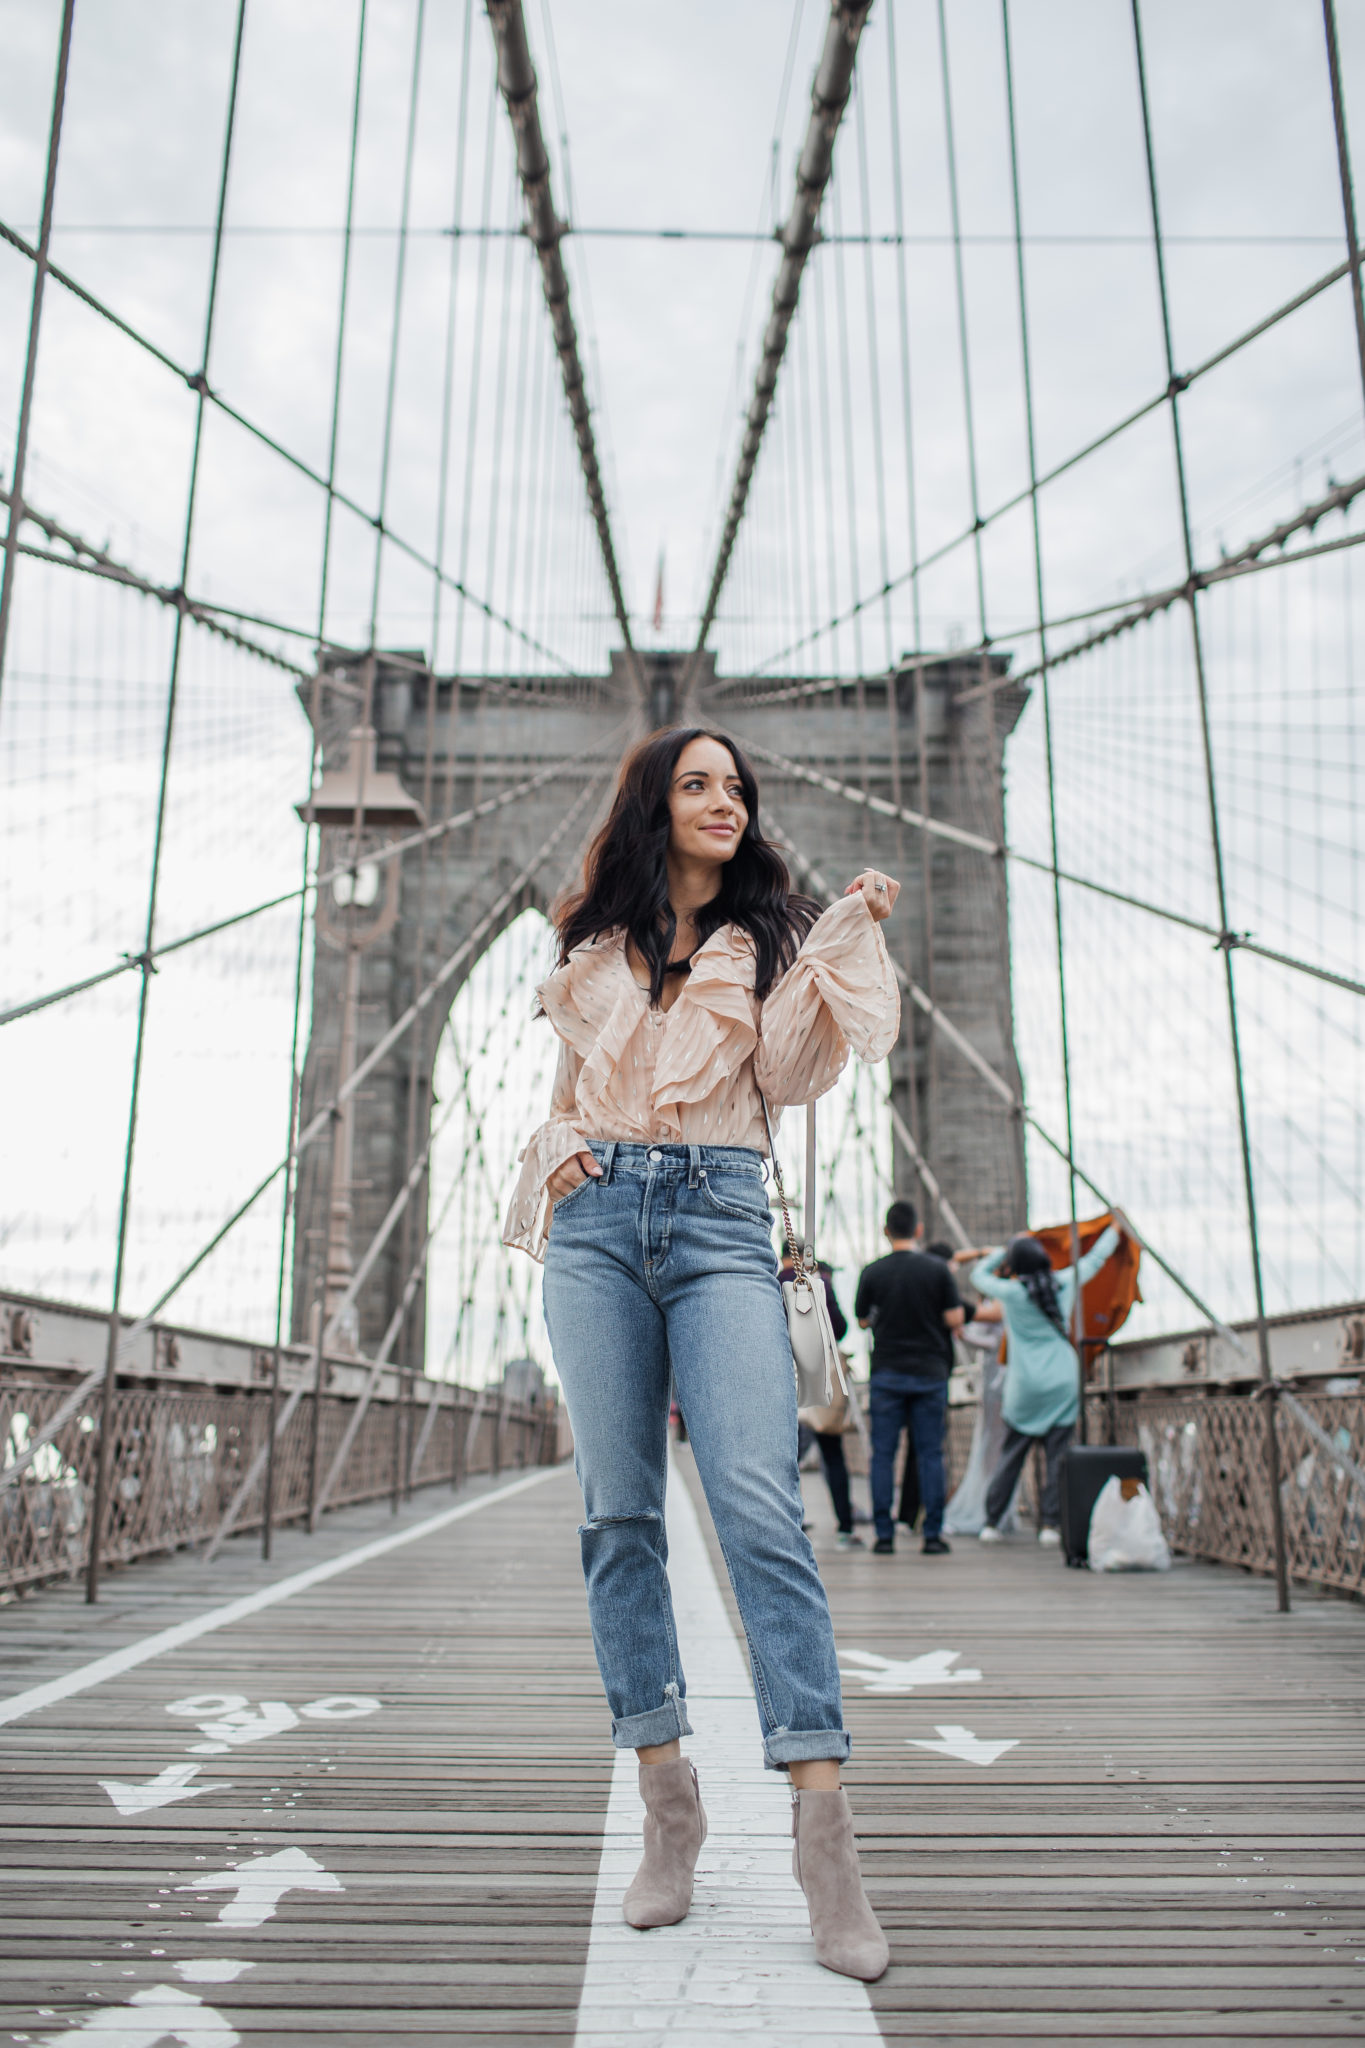 How to style a striped bodysuit for Fall, tips featured by top US fashion blog, Outfits & Outings: image of a woman wearing a REVOLVE striped bodysuit, SOCIALITE high waist slim jeans, and Vince Camuto suede booties.